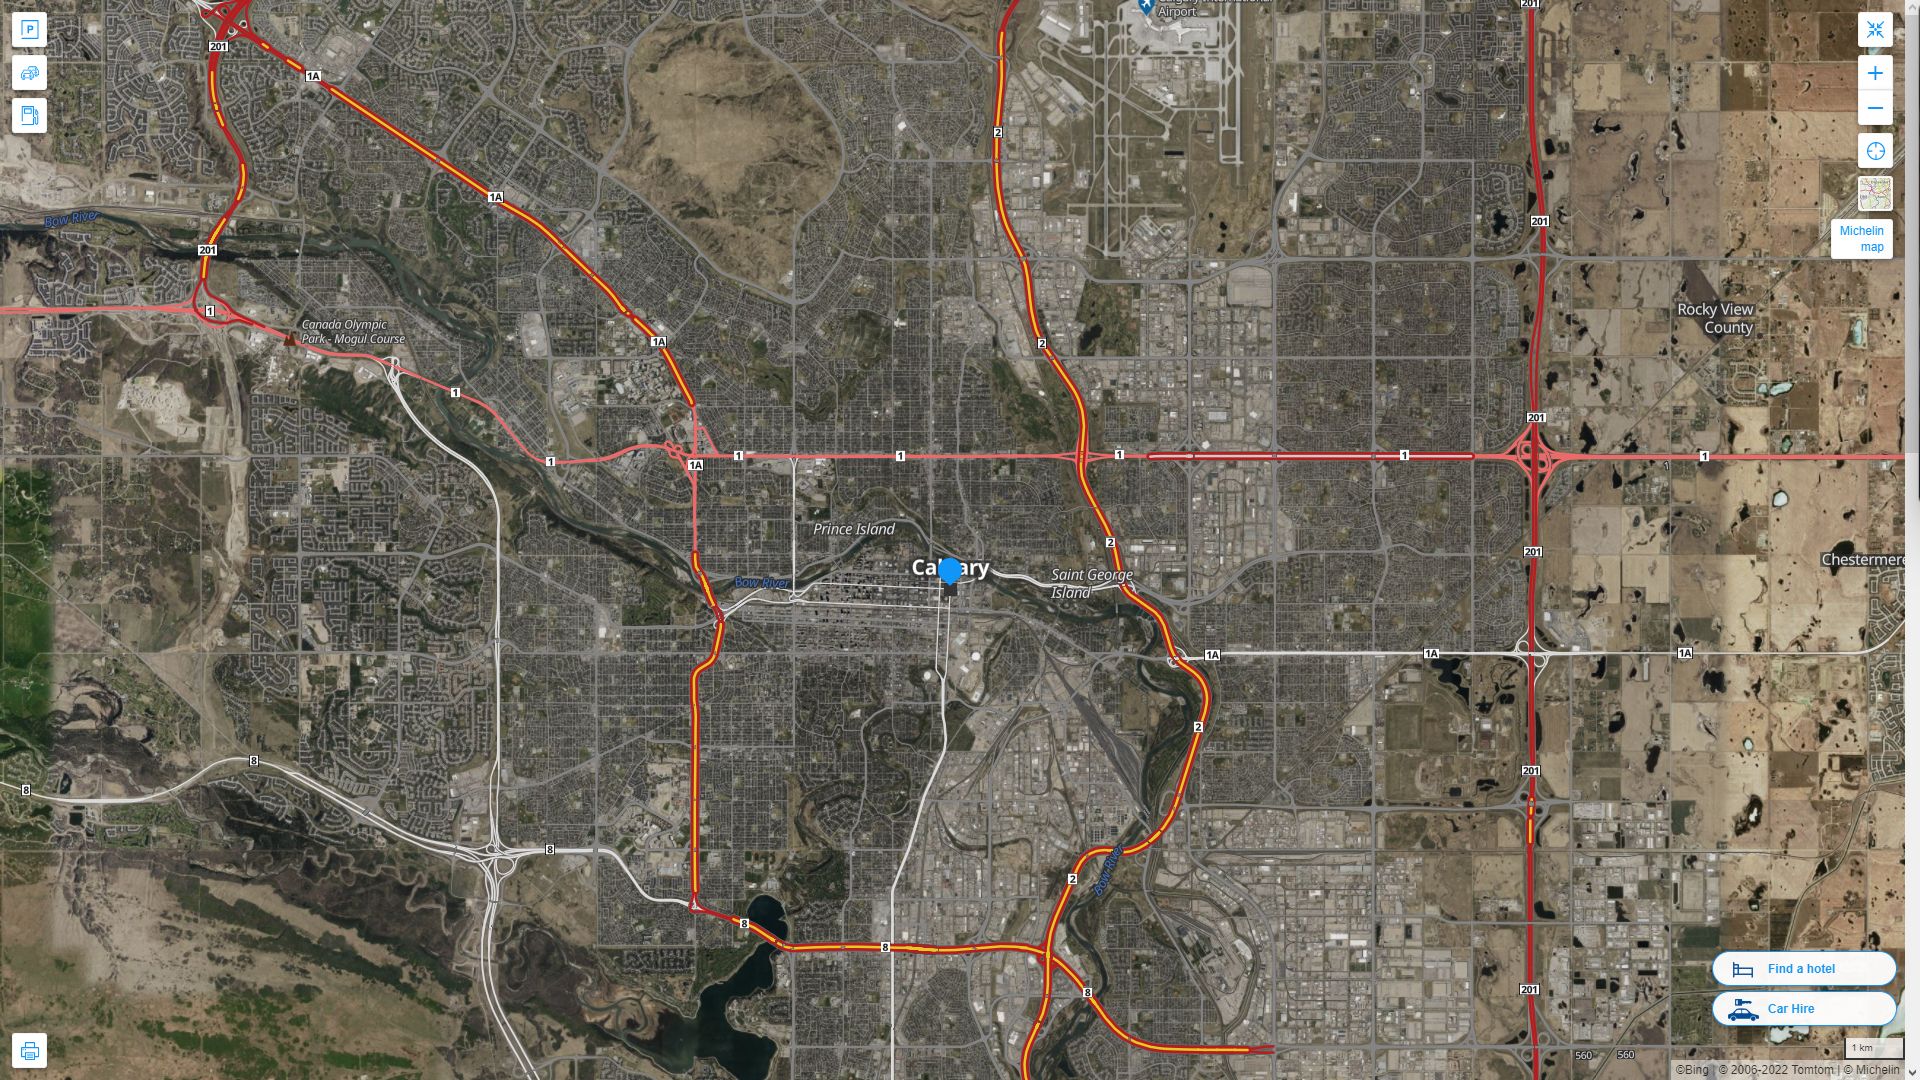 Calgary Highway and Road Map with Satellite View